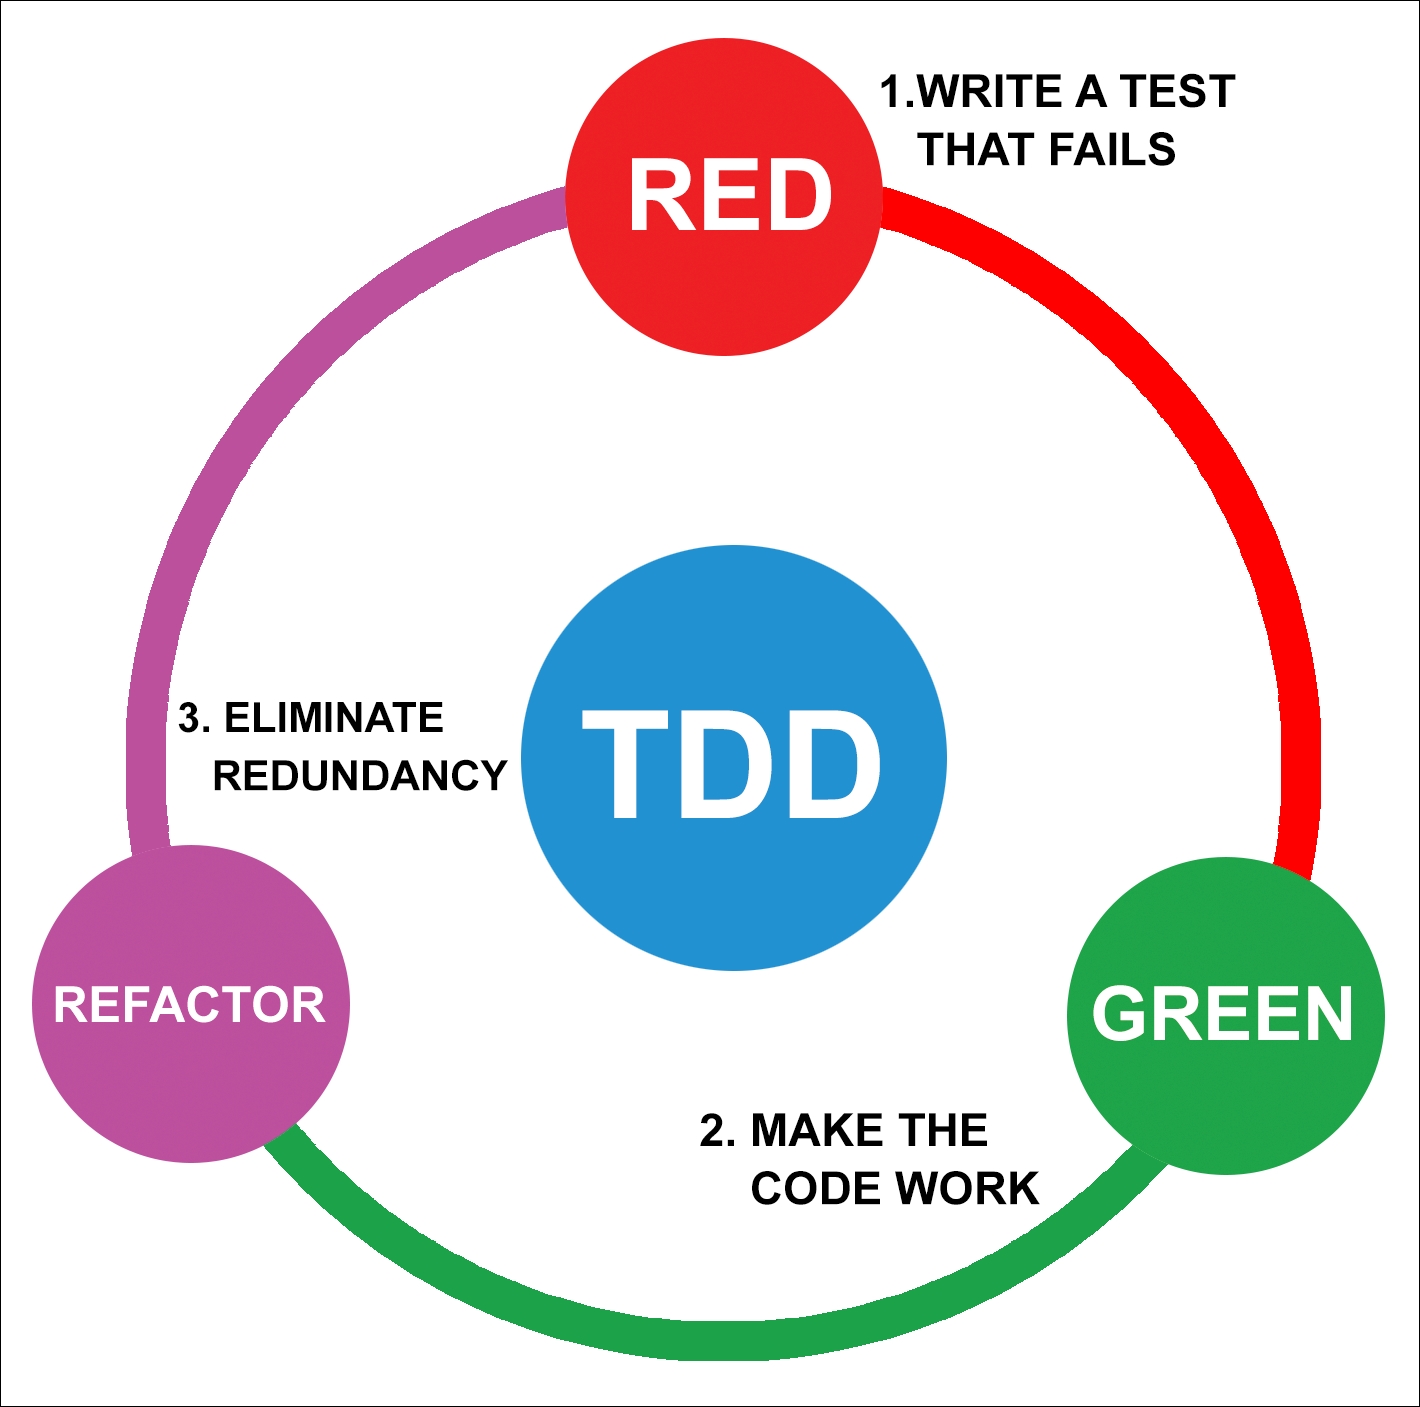 How to do TDD?